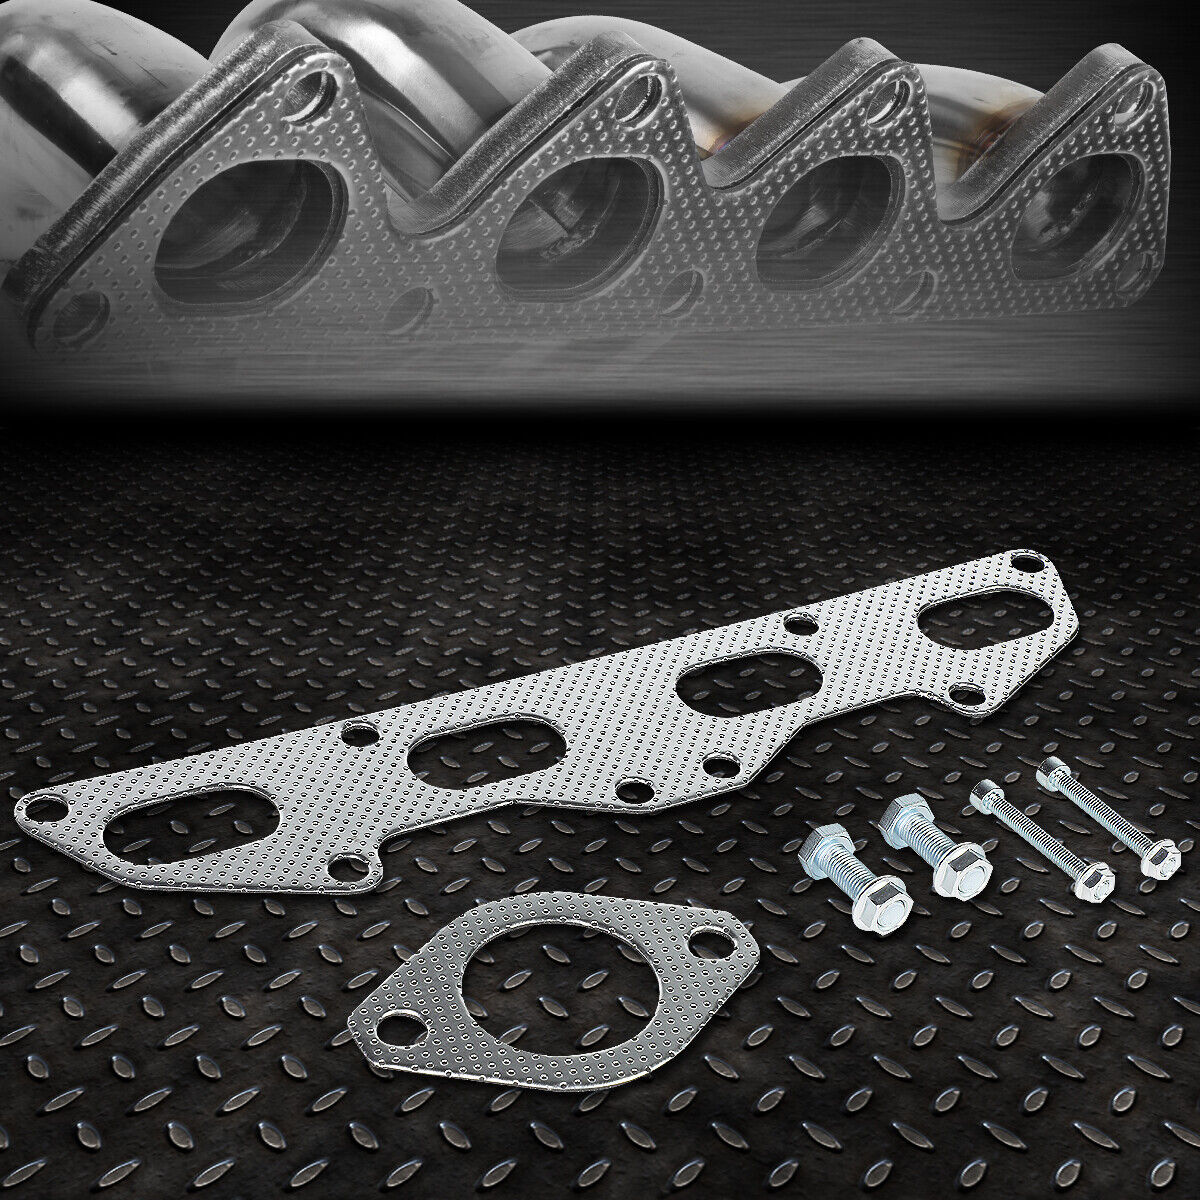 FOR 95-99 ECLIPSE TALON 2.0 NON-TURBO EXHAUST MANIFOLD HEADER GASKET SET W/BOLTS